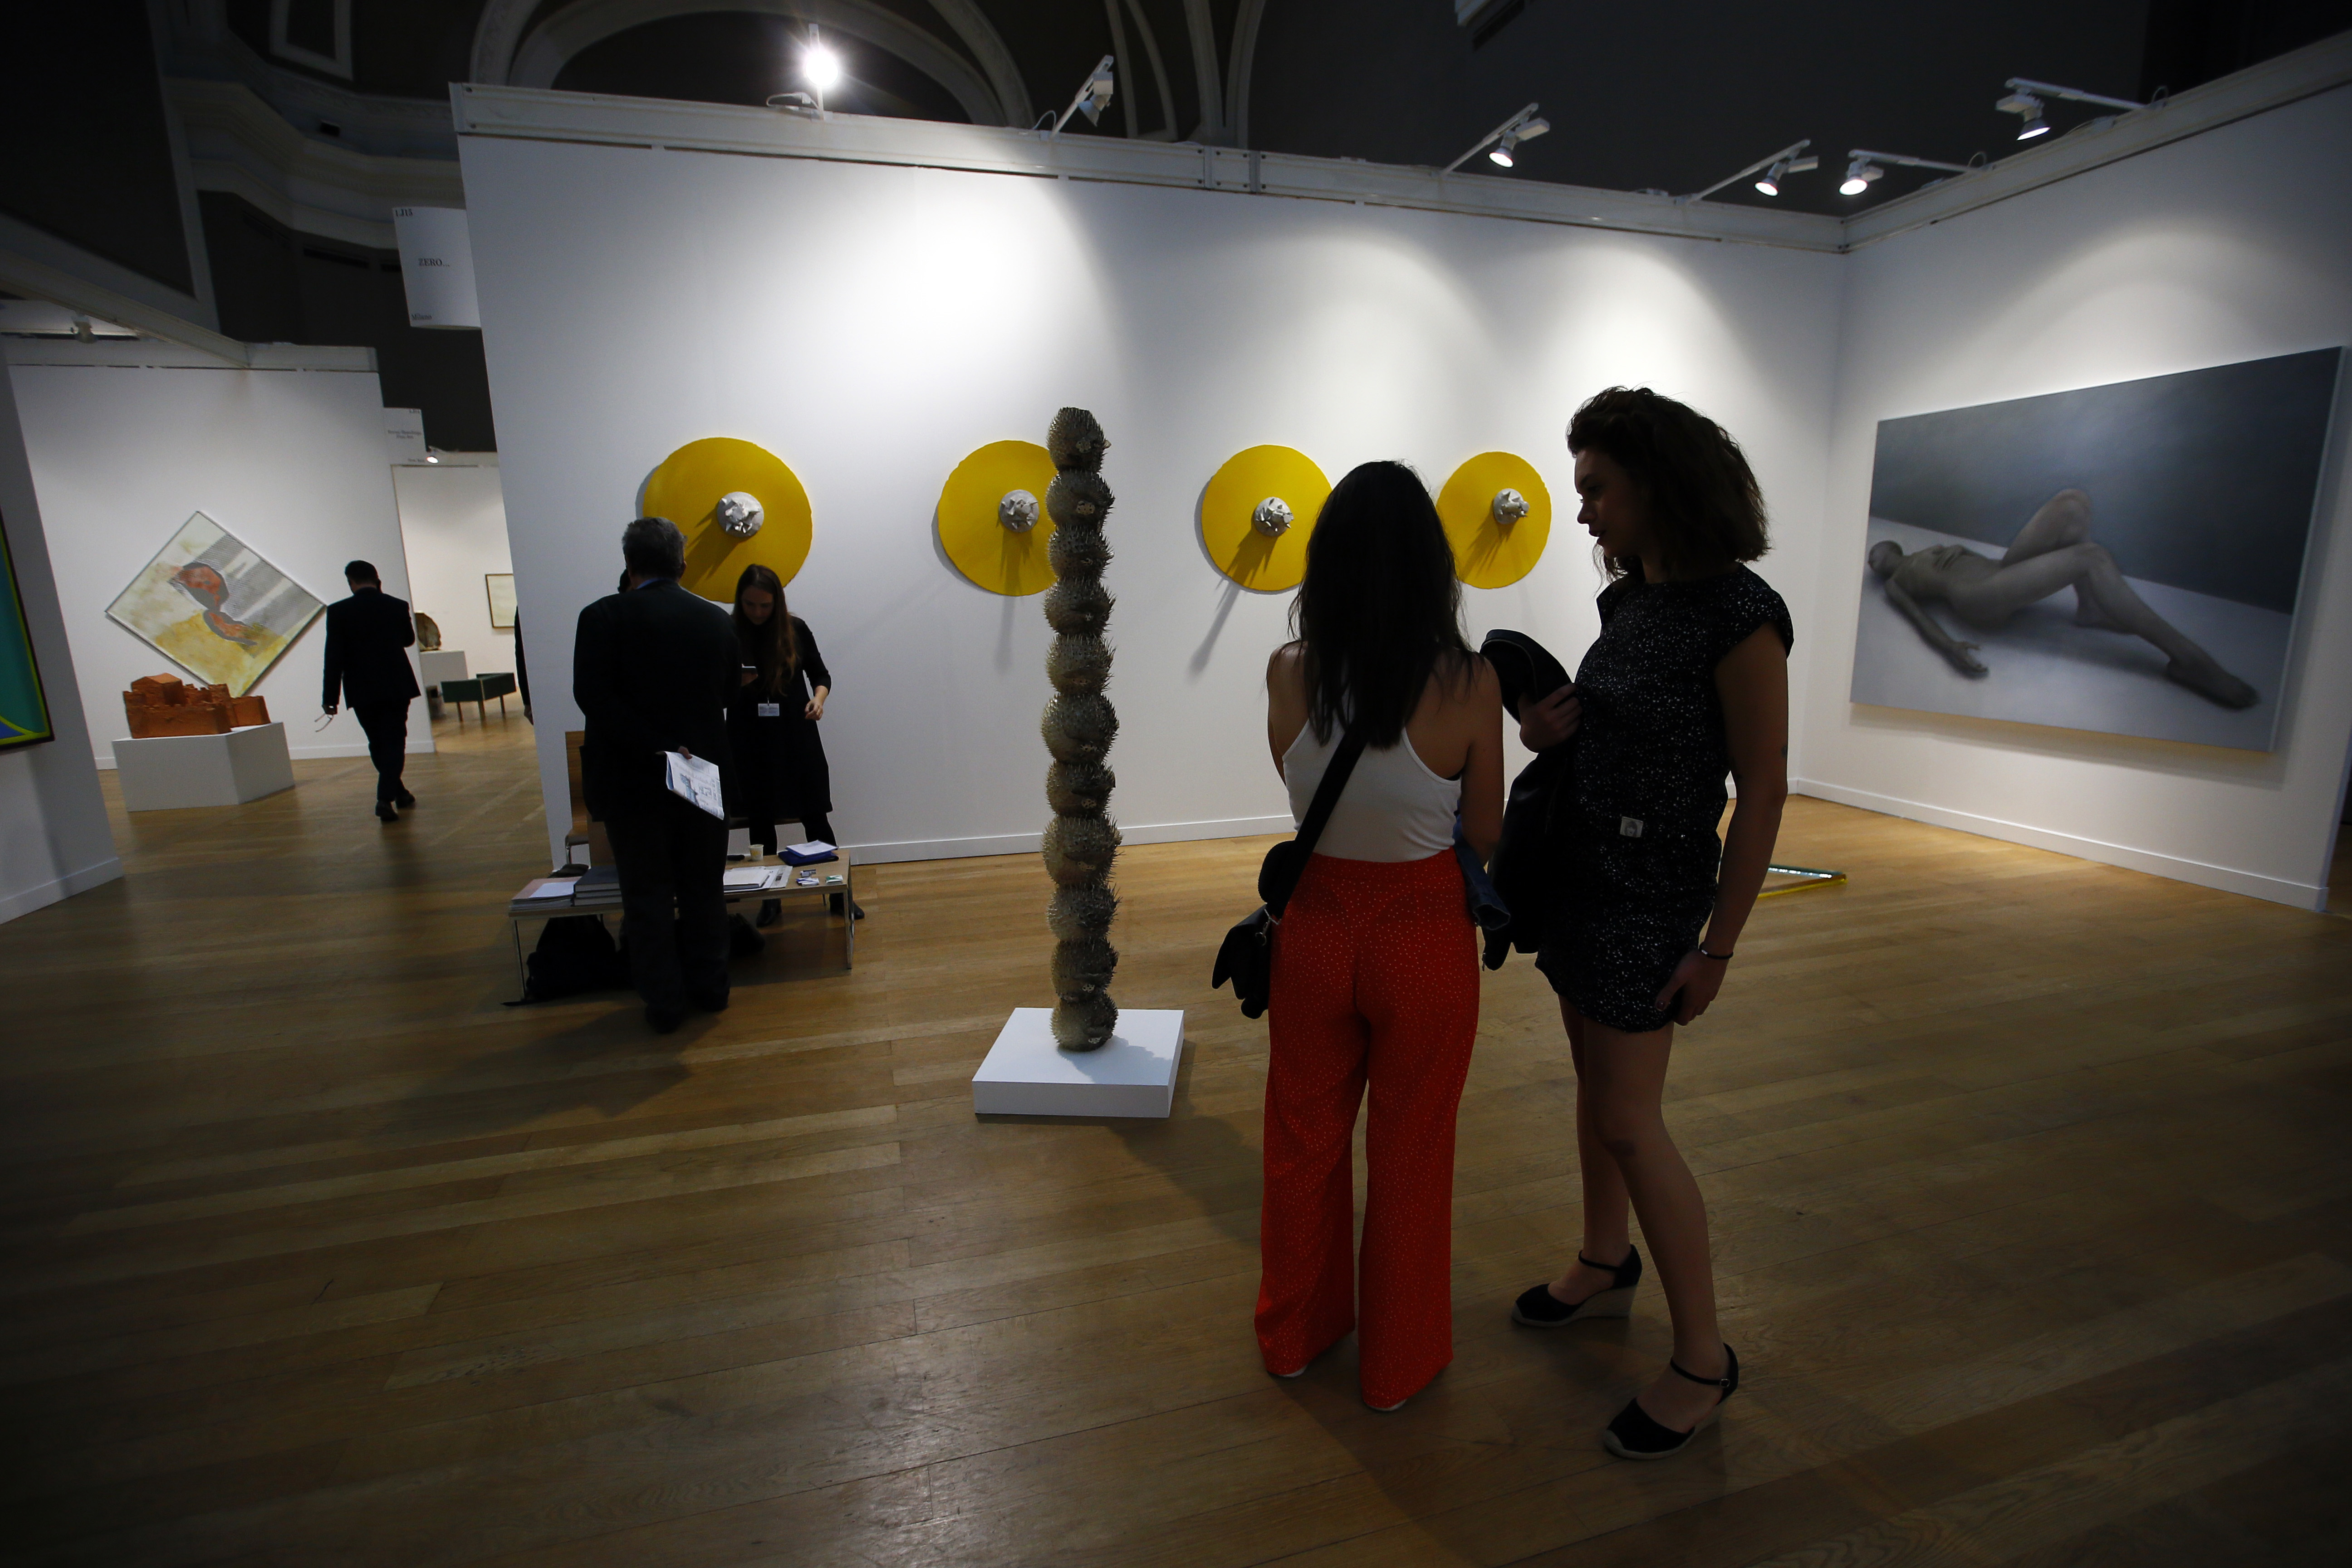 Visitors look on during the opening of the FIAC art fair at the Grand Palais in Paris, France, Thursday Oct. 19, 2017. (AP Photo/Francois Mori)